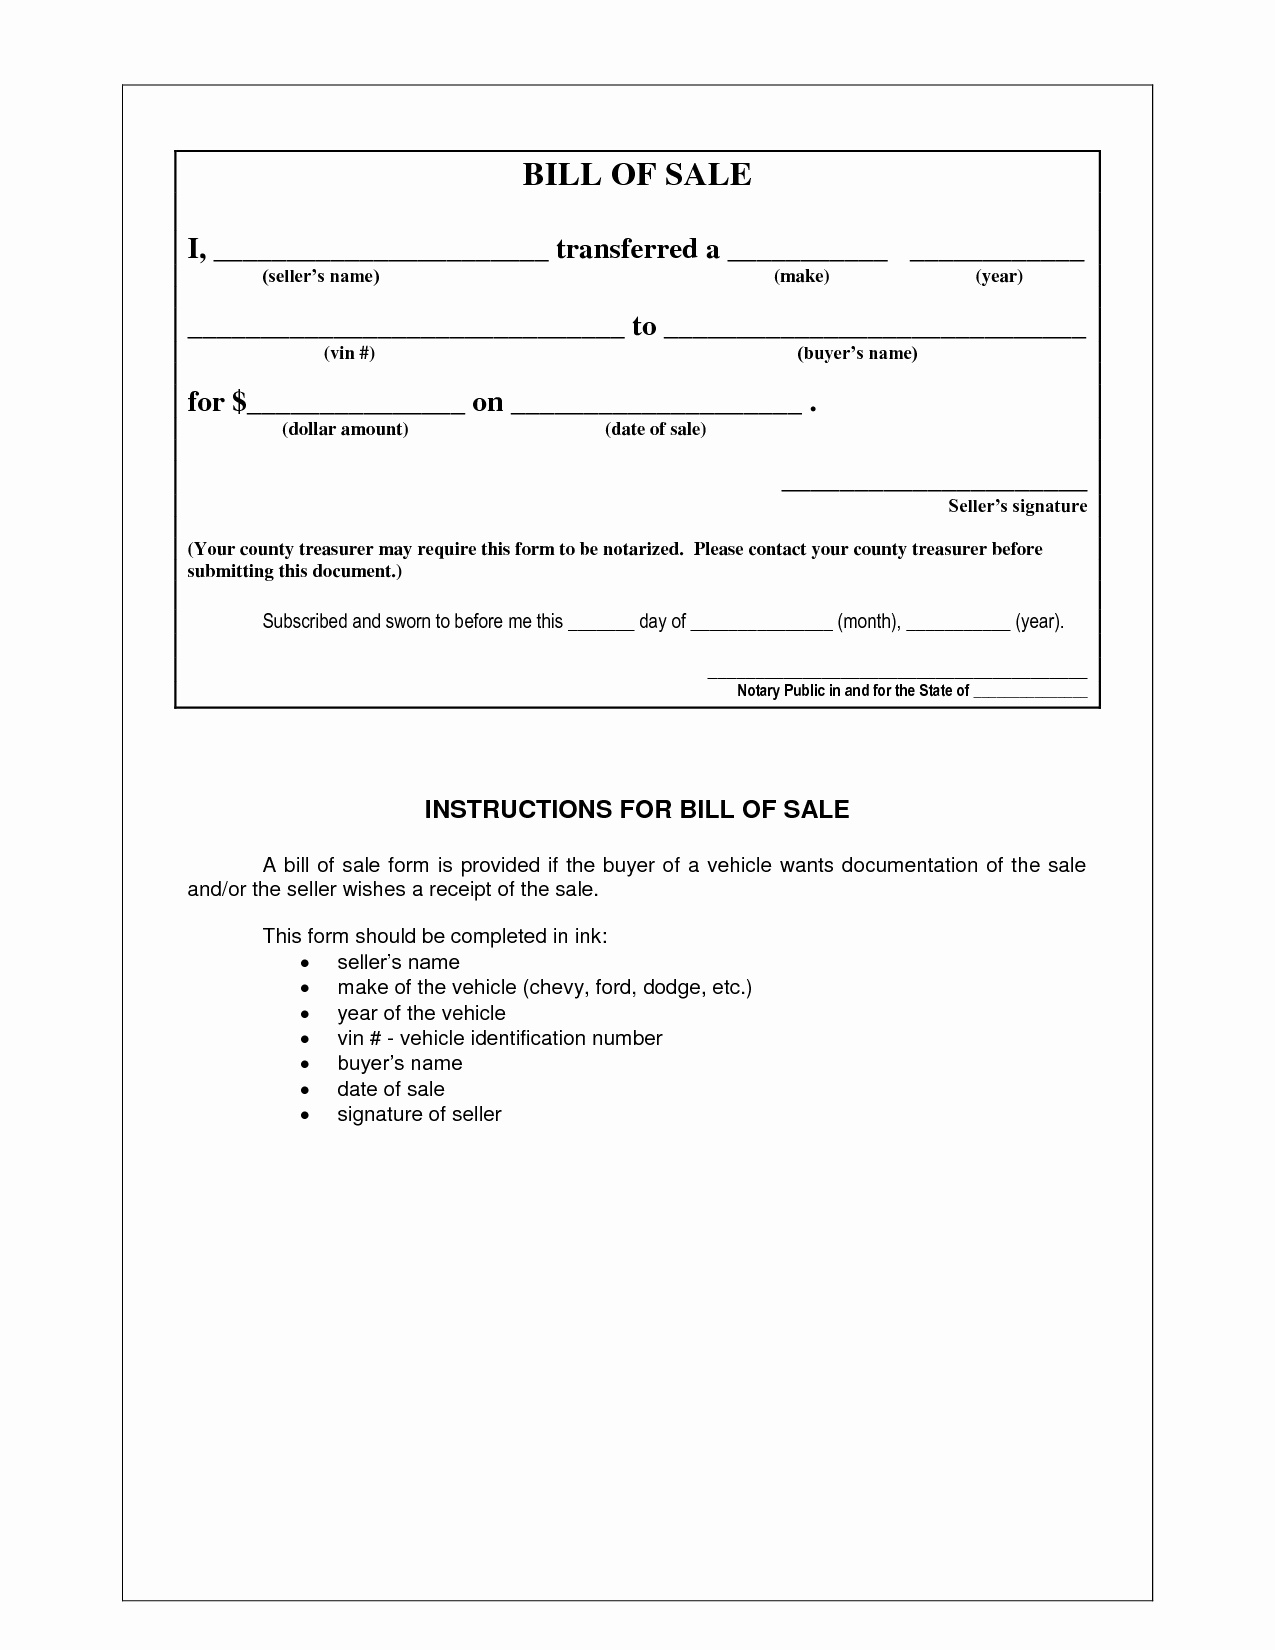 Bill Of Sale Free form Awesome Picture 5 Of 17 Example Bill Sale form